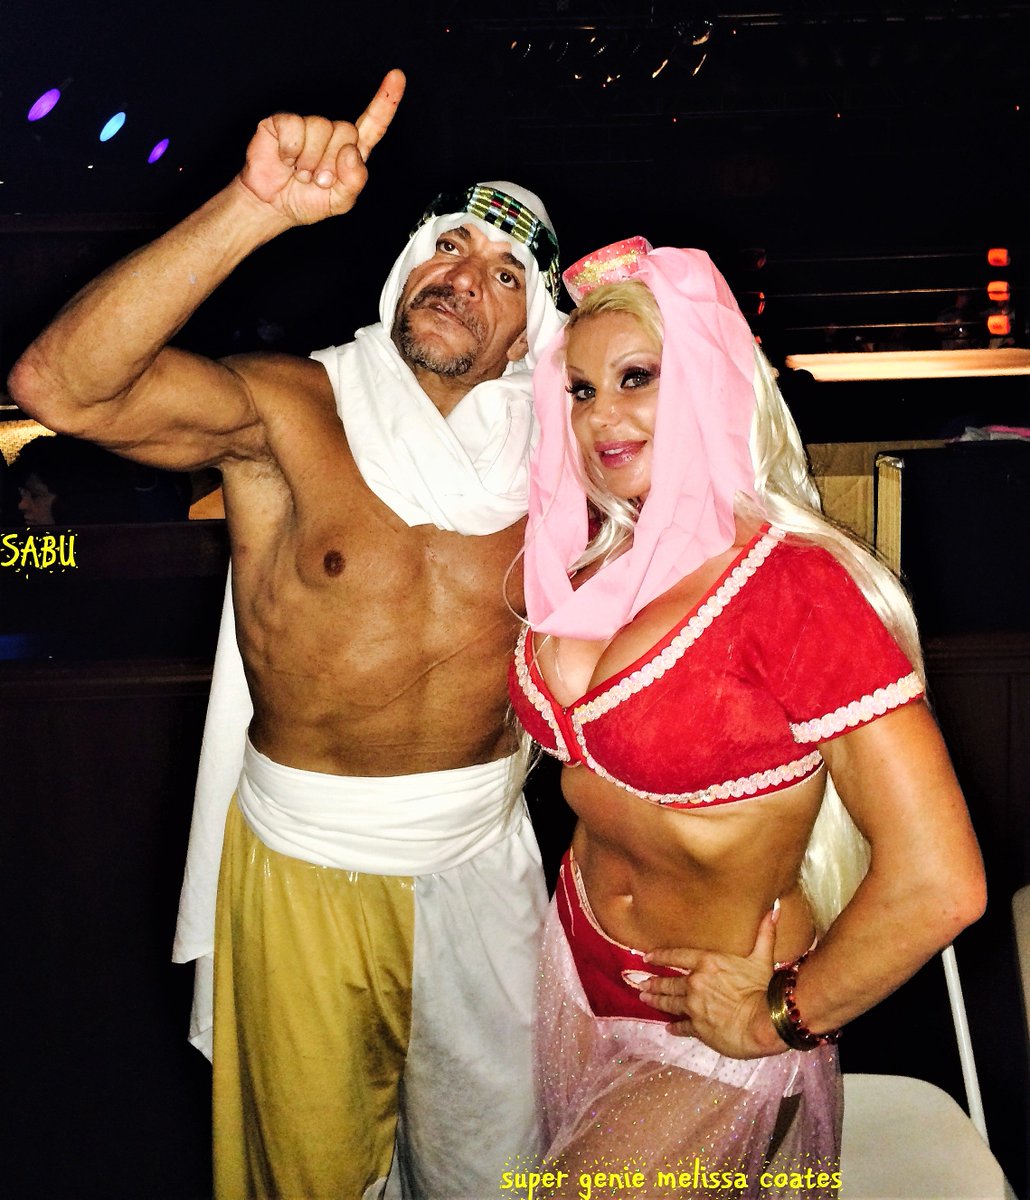 RIP Super Genie Thanks for all the wonderful memories. My heart breaks for Sabu.